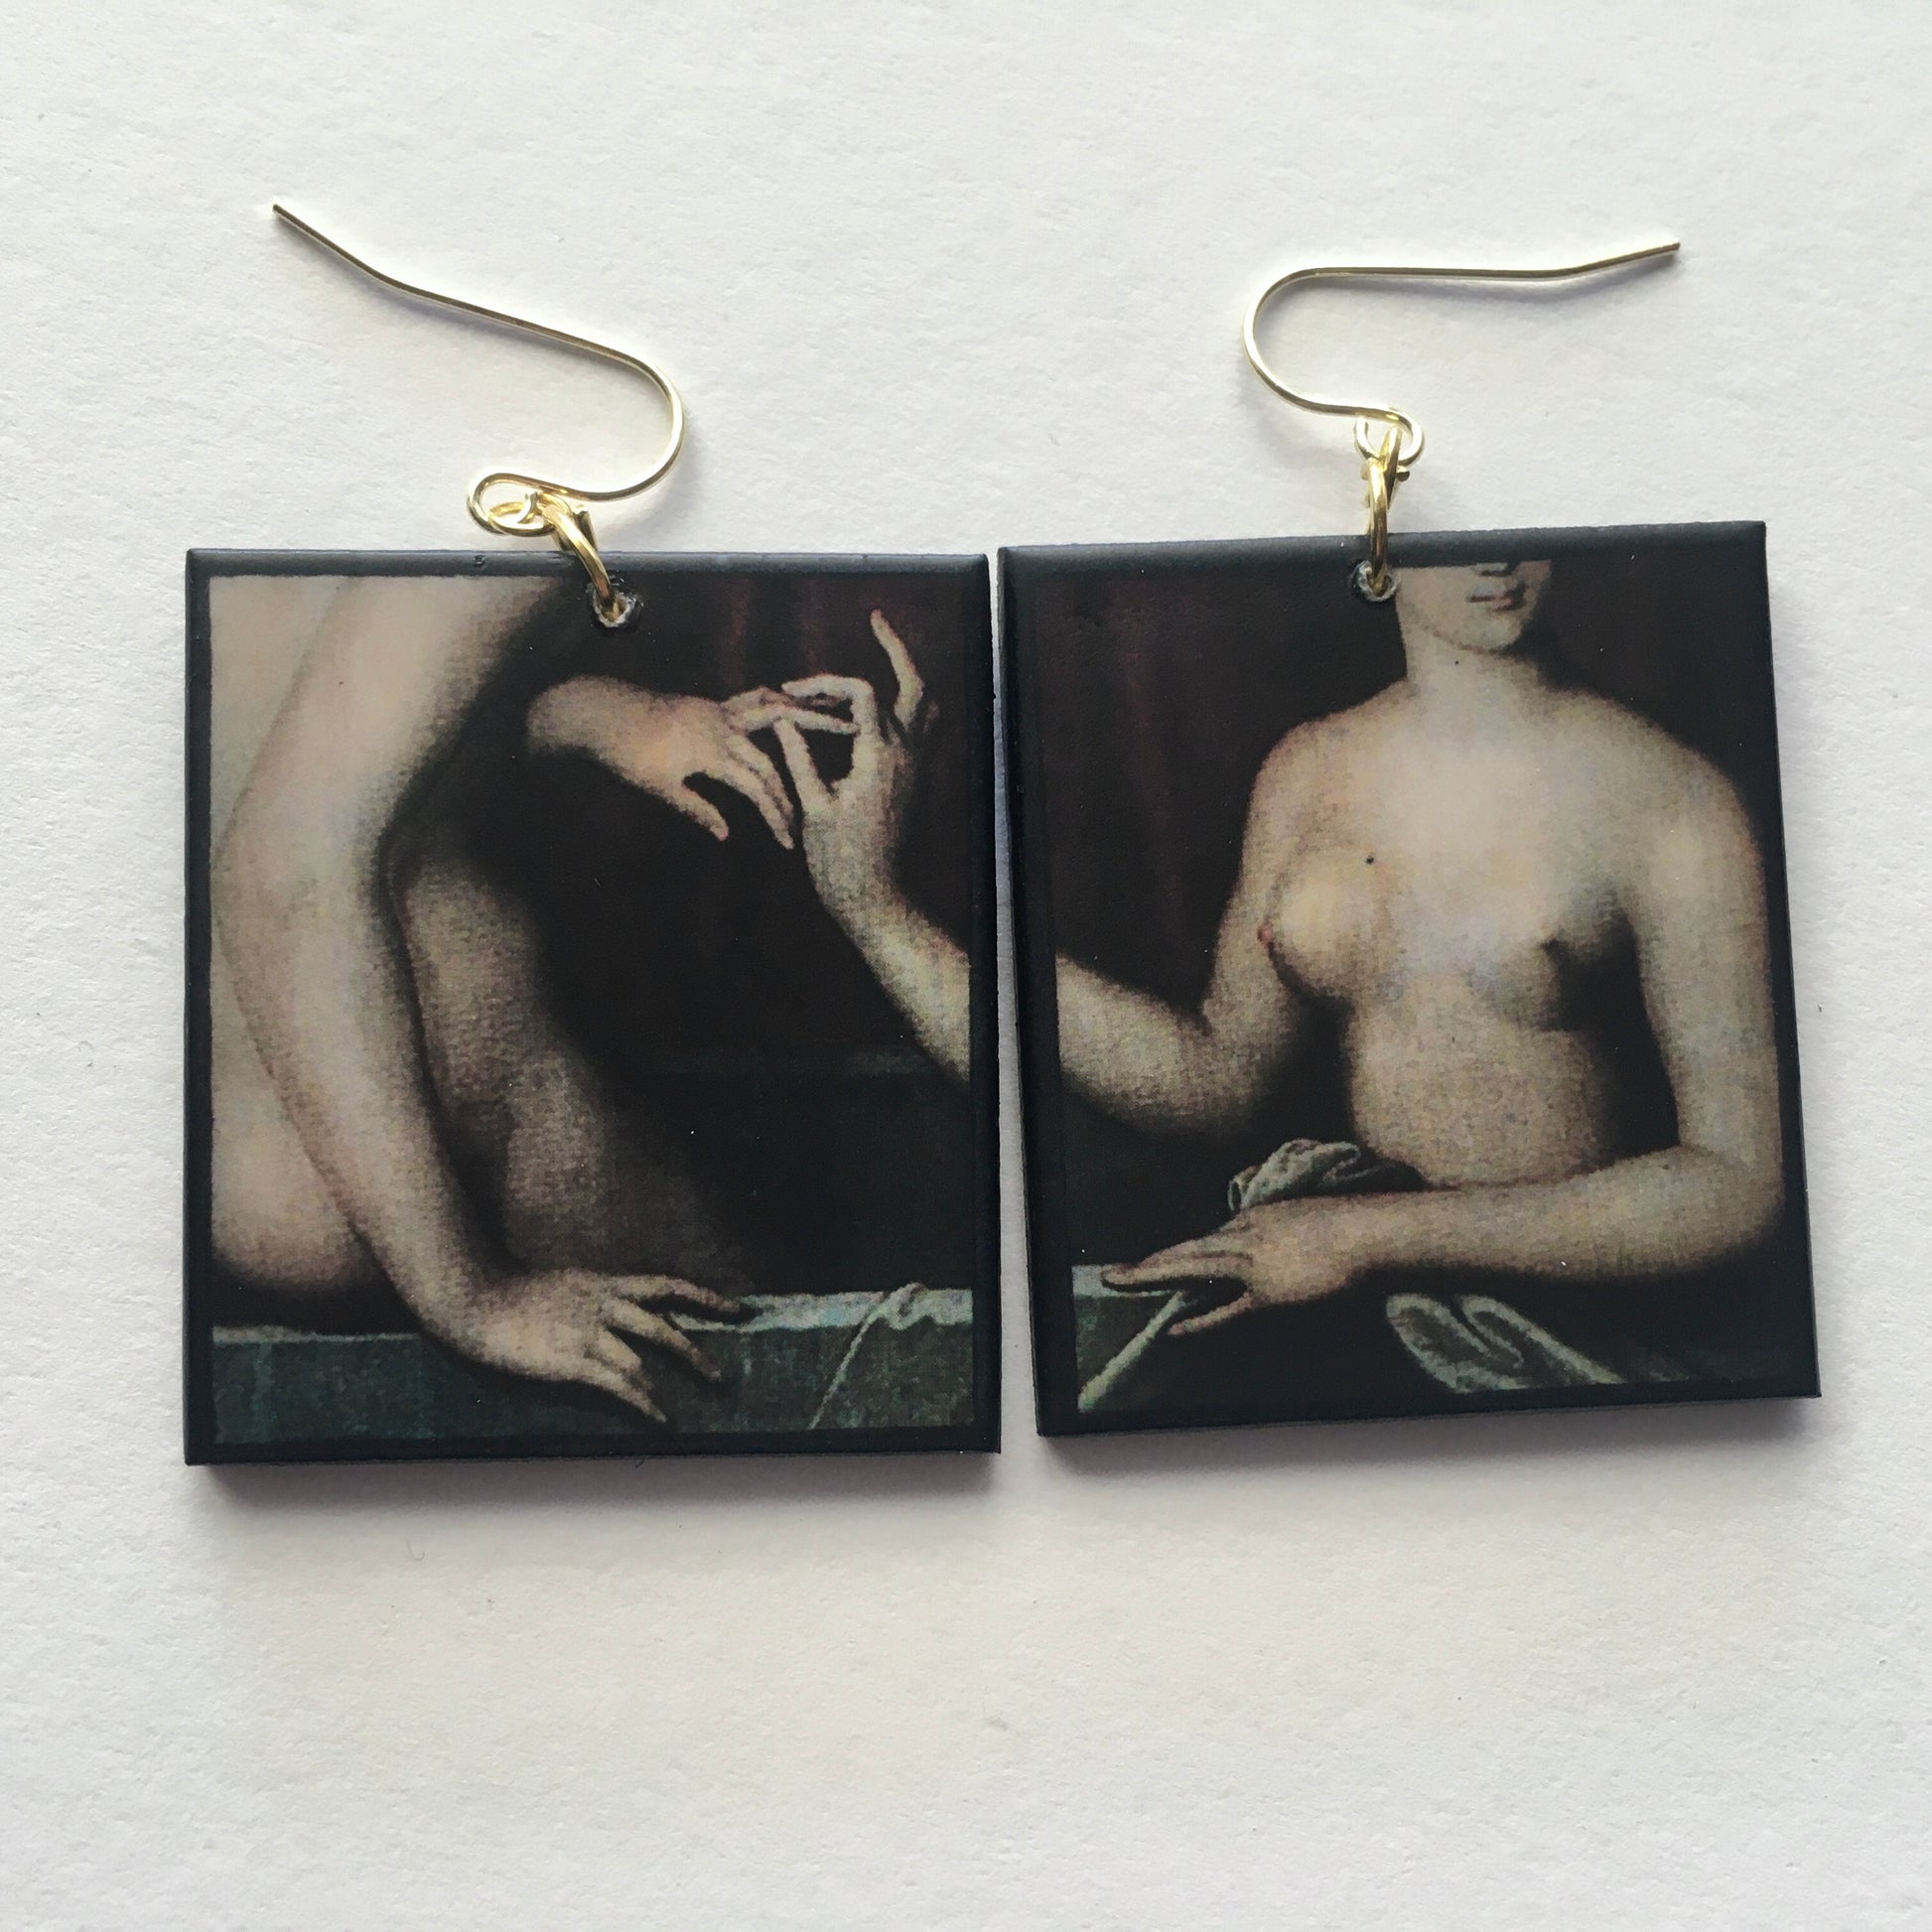 Sensual art detail earrings handmade from sustainable wood by Obljewellery. The detail comes from a painting by Ecole de Fontainebleau, two necked women engagement ring moment.